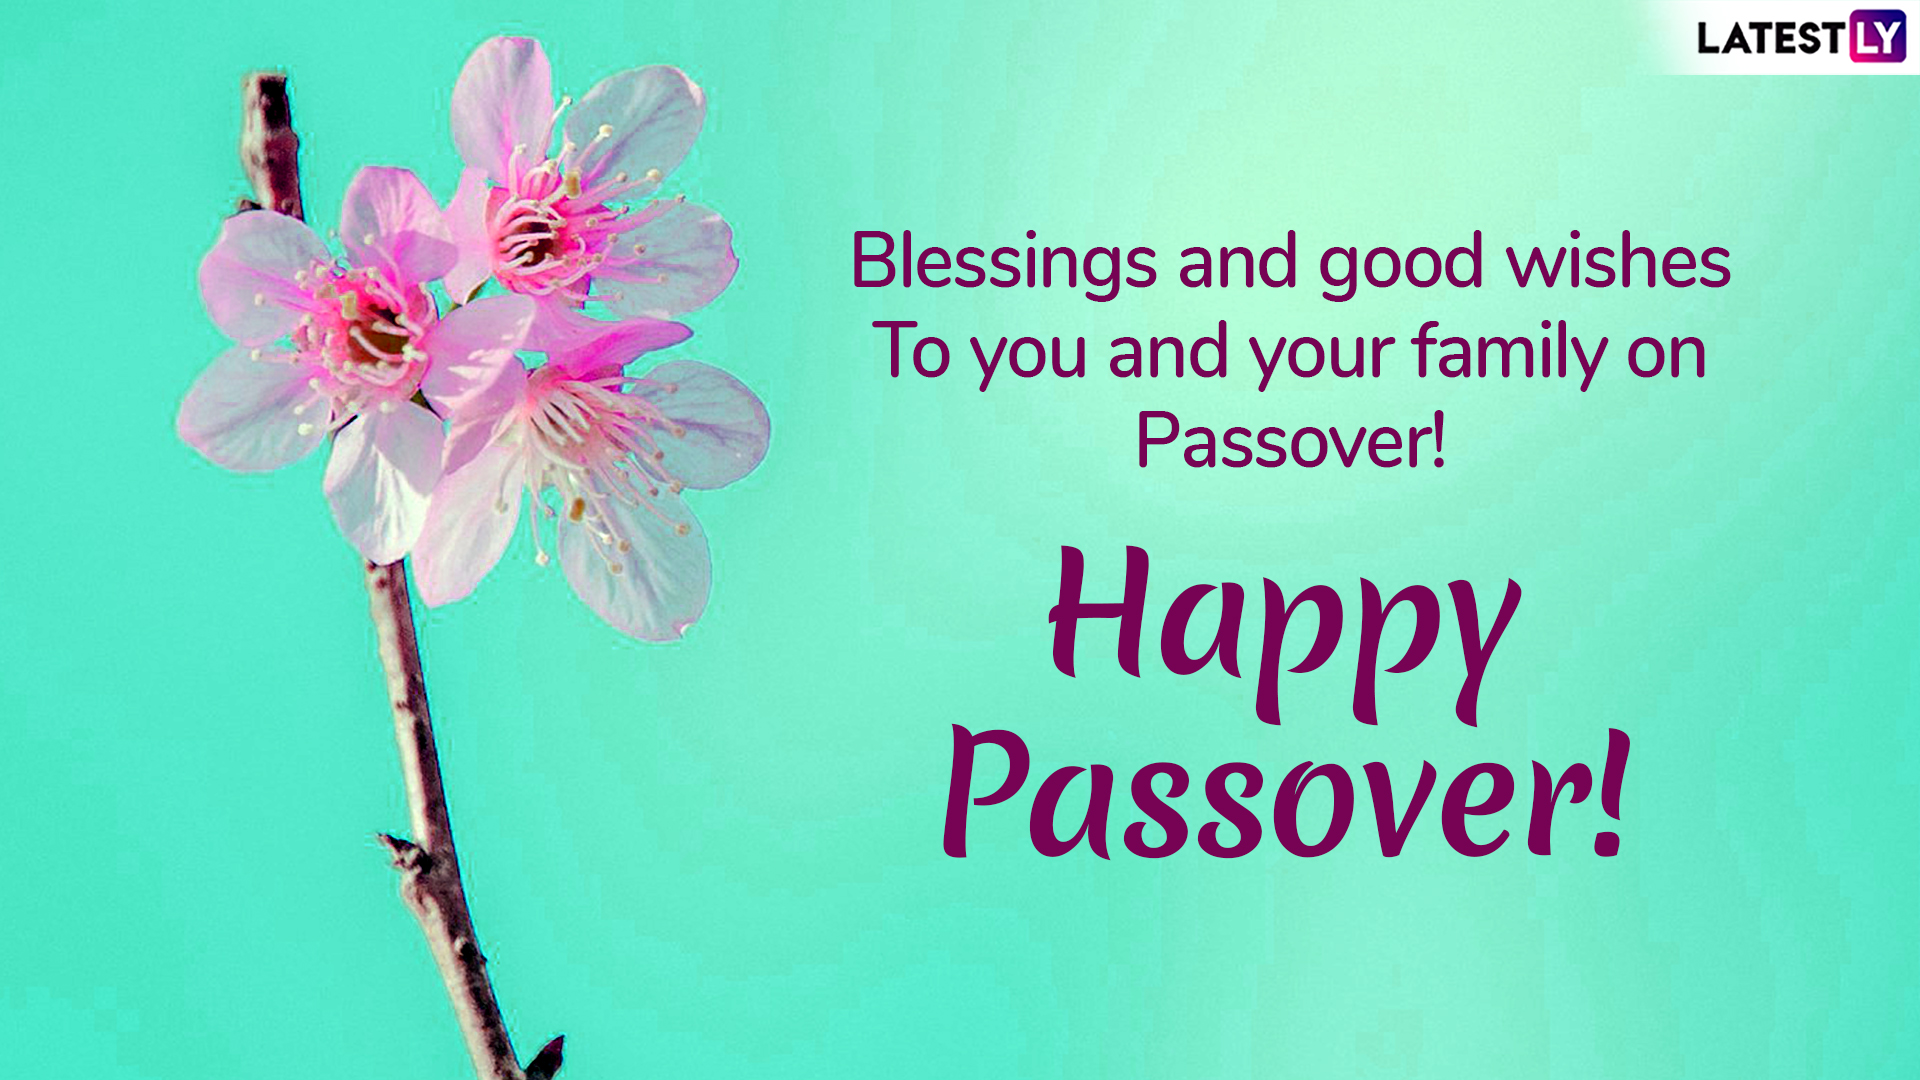 Passover 2019 Greetings Whatsapp Messages Images Chag Sameach